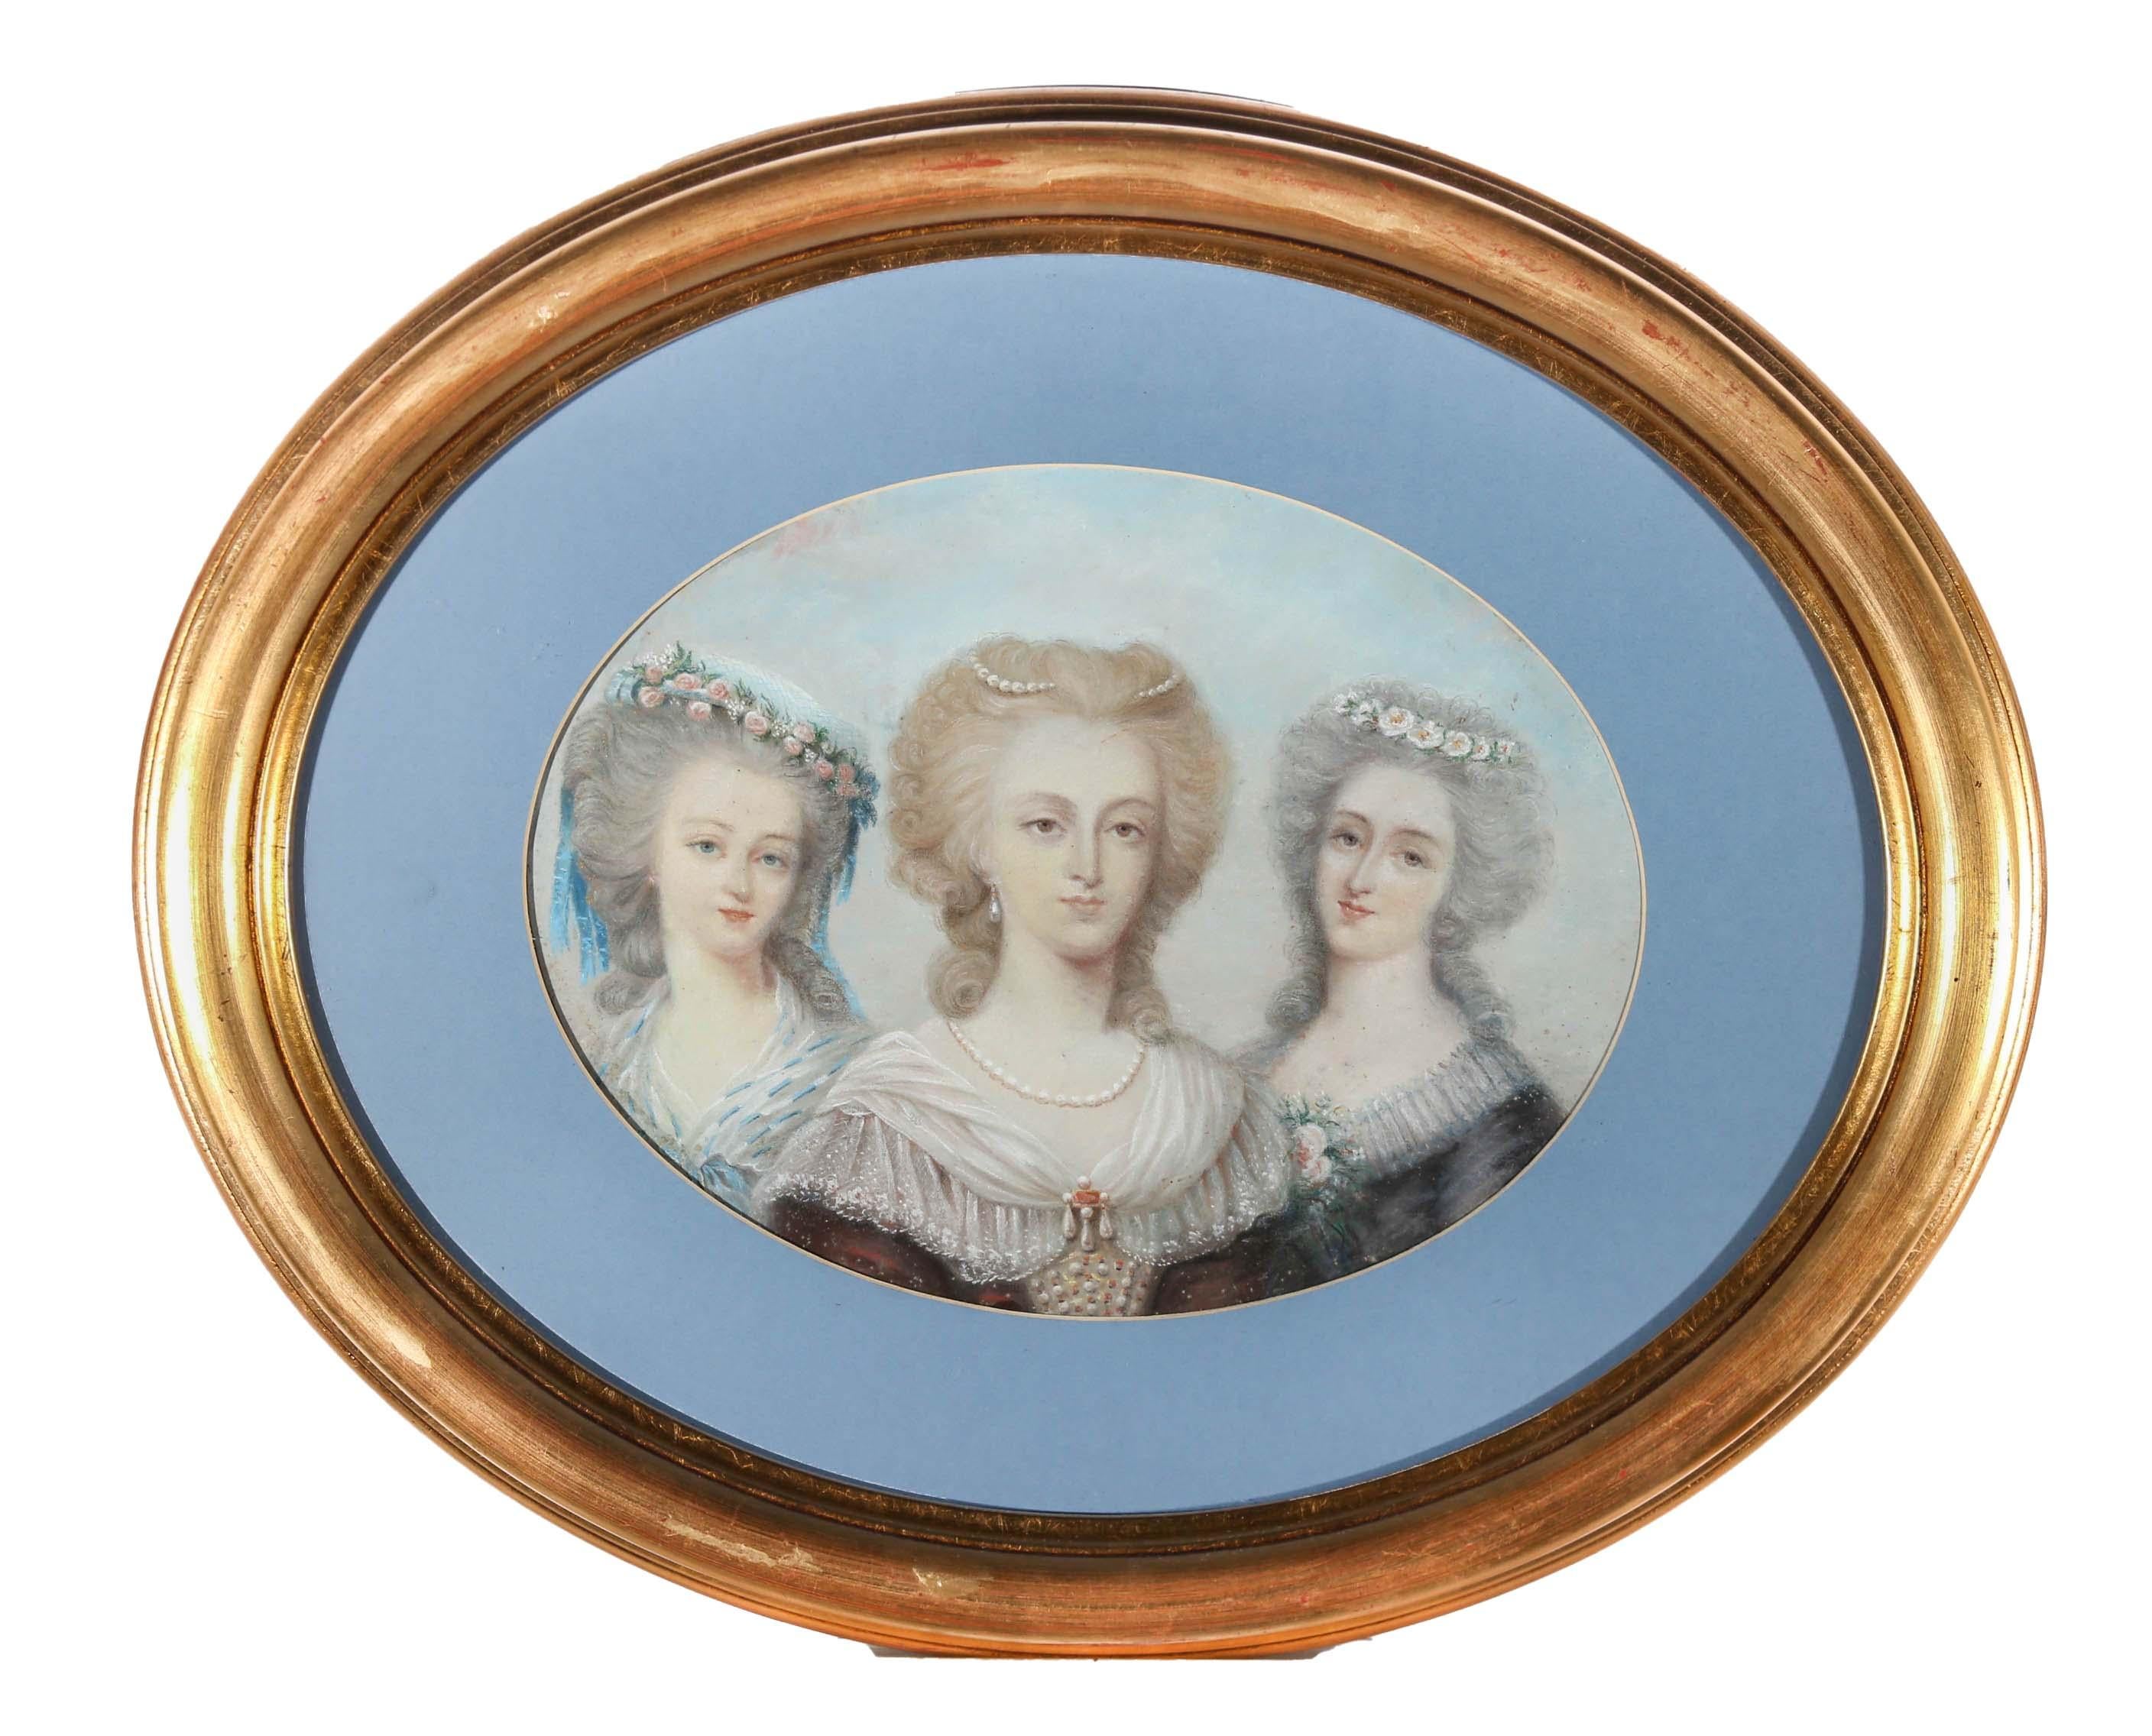 A delightful pastel portrait depicting three Regency women in fashionable dress. The style is a of the French revival period of the early 20th Century, where Regency fashion became a topic of many artists. The ladies are captures in excellent